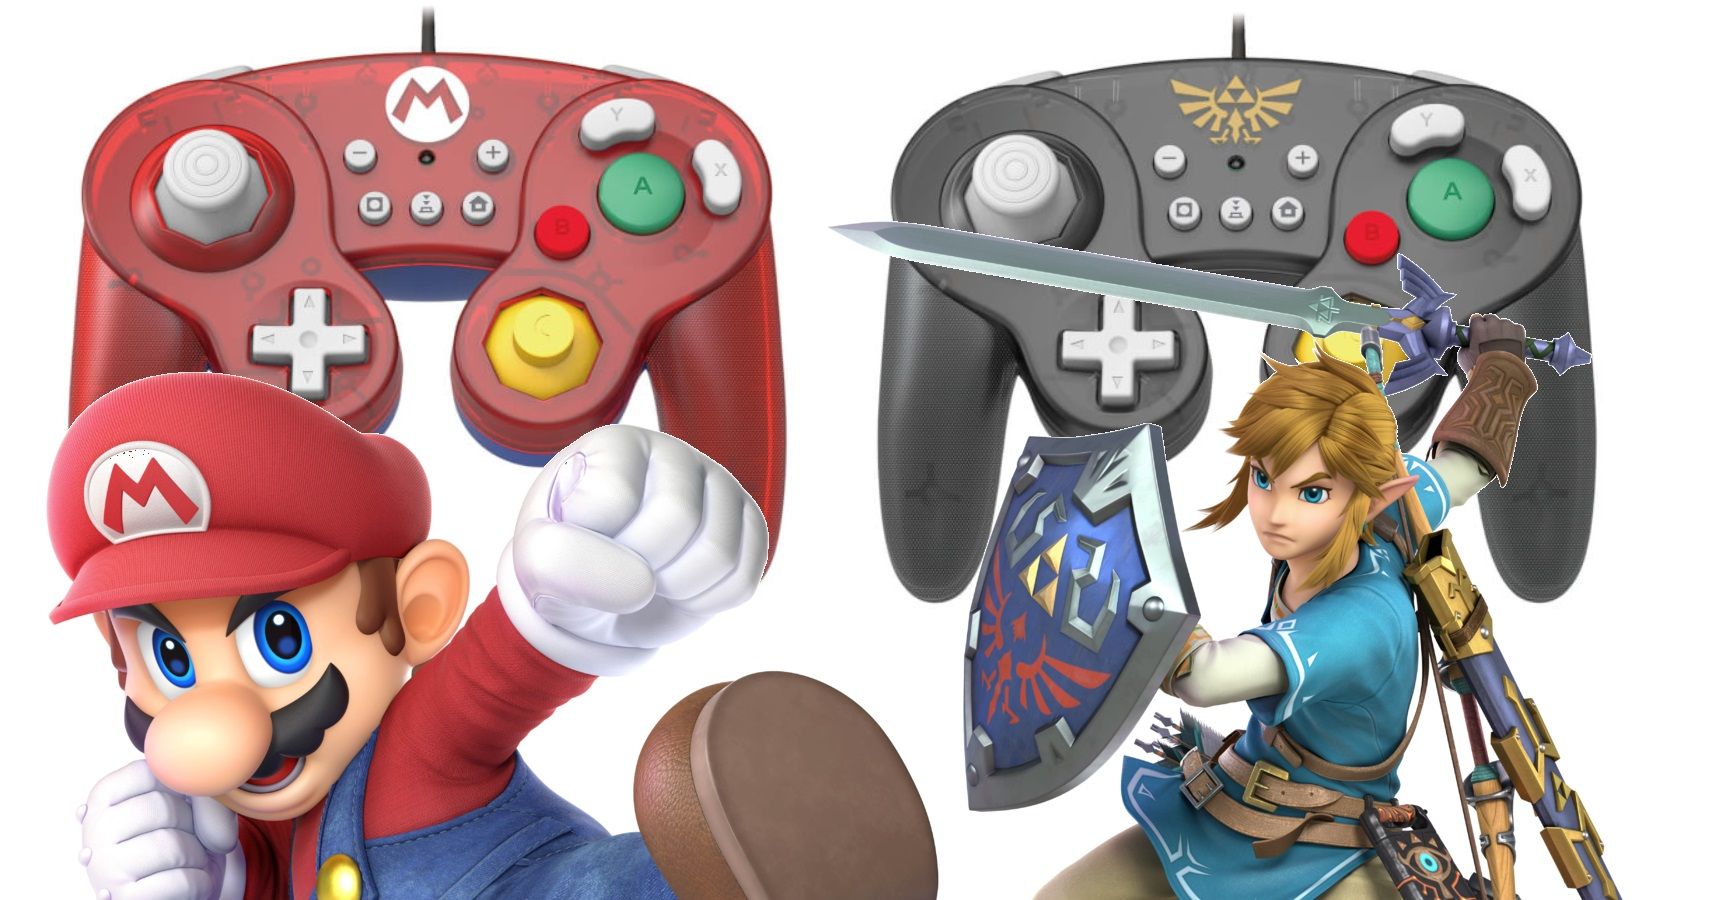 Get Mario And Link GameCube Controllers With New Smash Bros. Ultimate  Switch Bundle